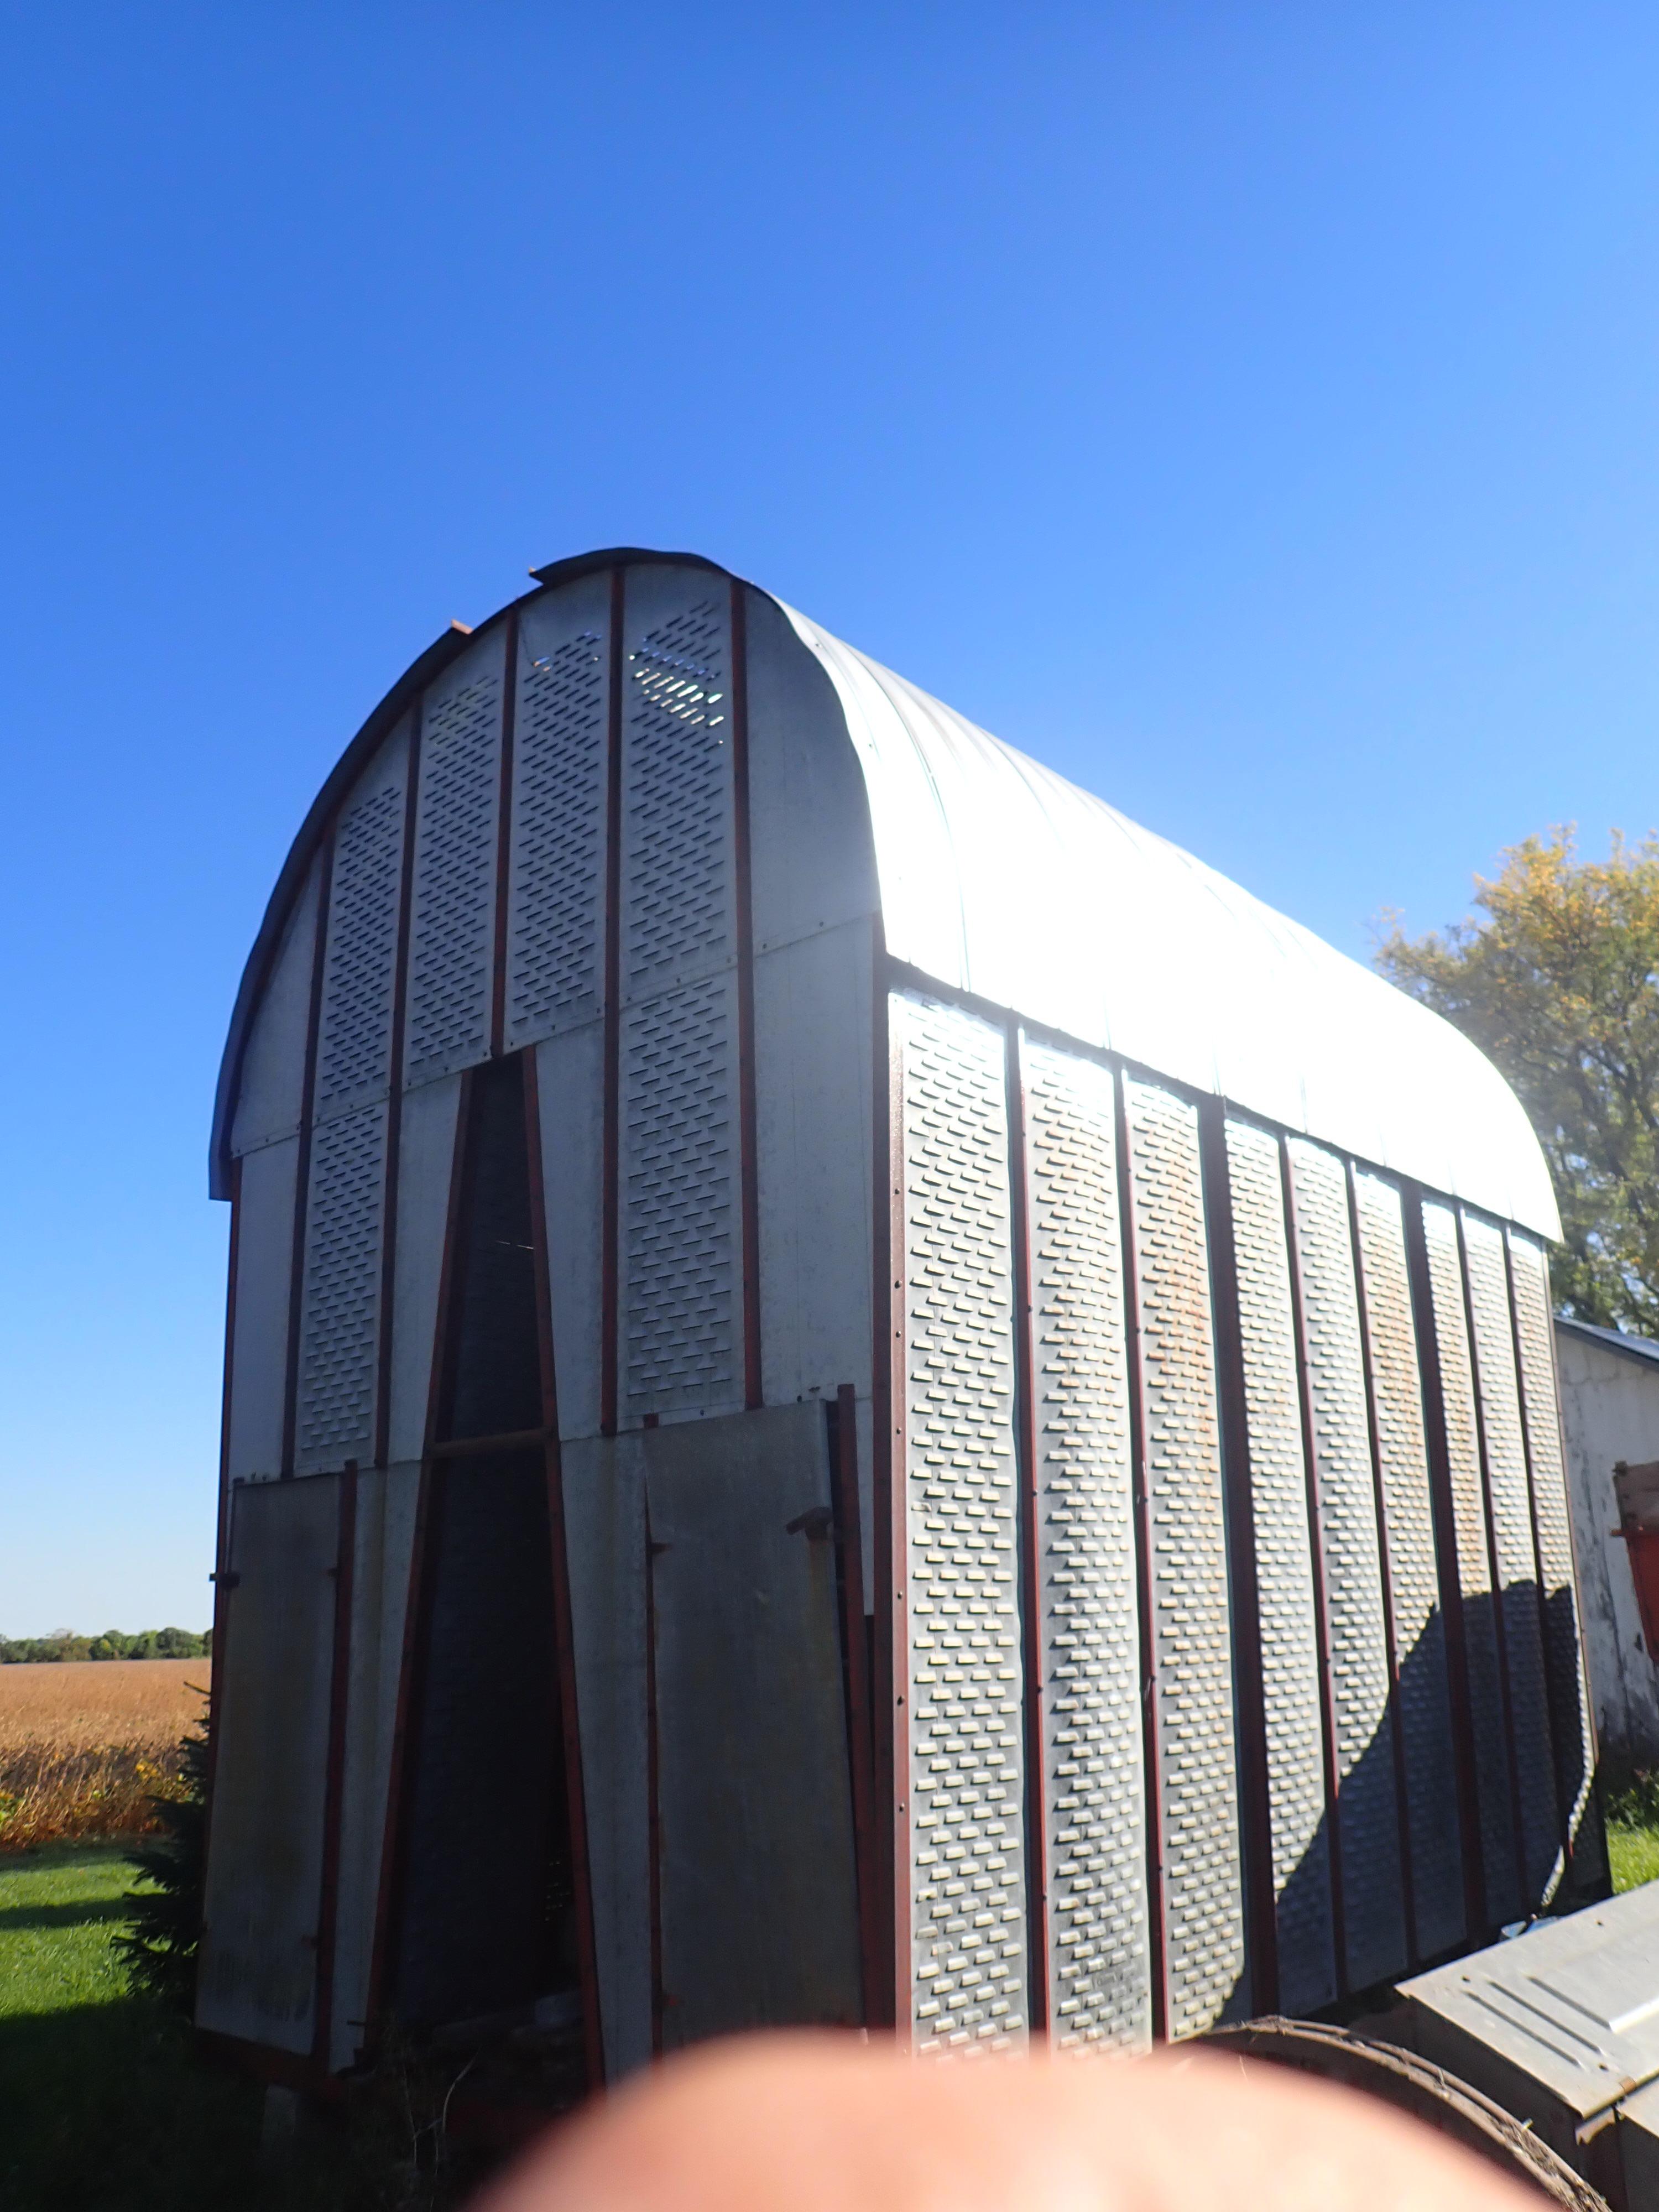 STEEL DOUBLE WIDE CORN CRIB, 18'L X 11 1/2'W X 17'T WITHOUT VENT CAP